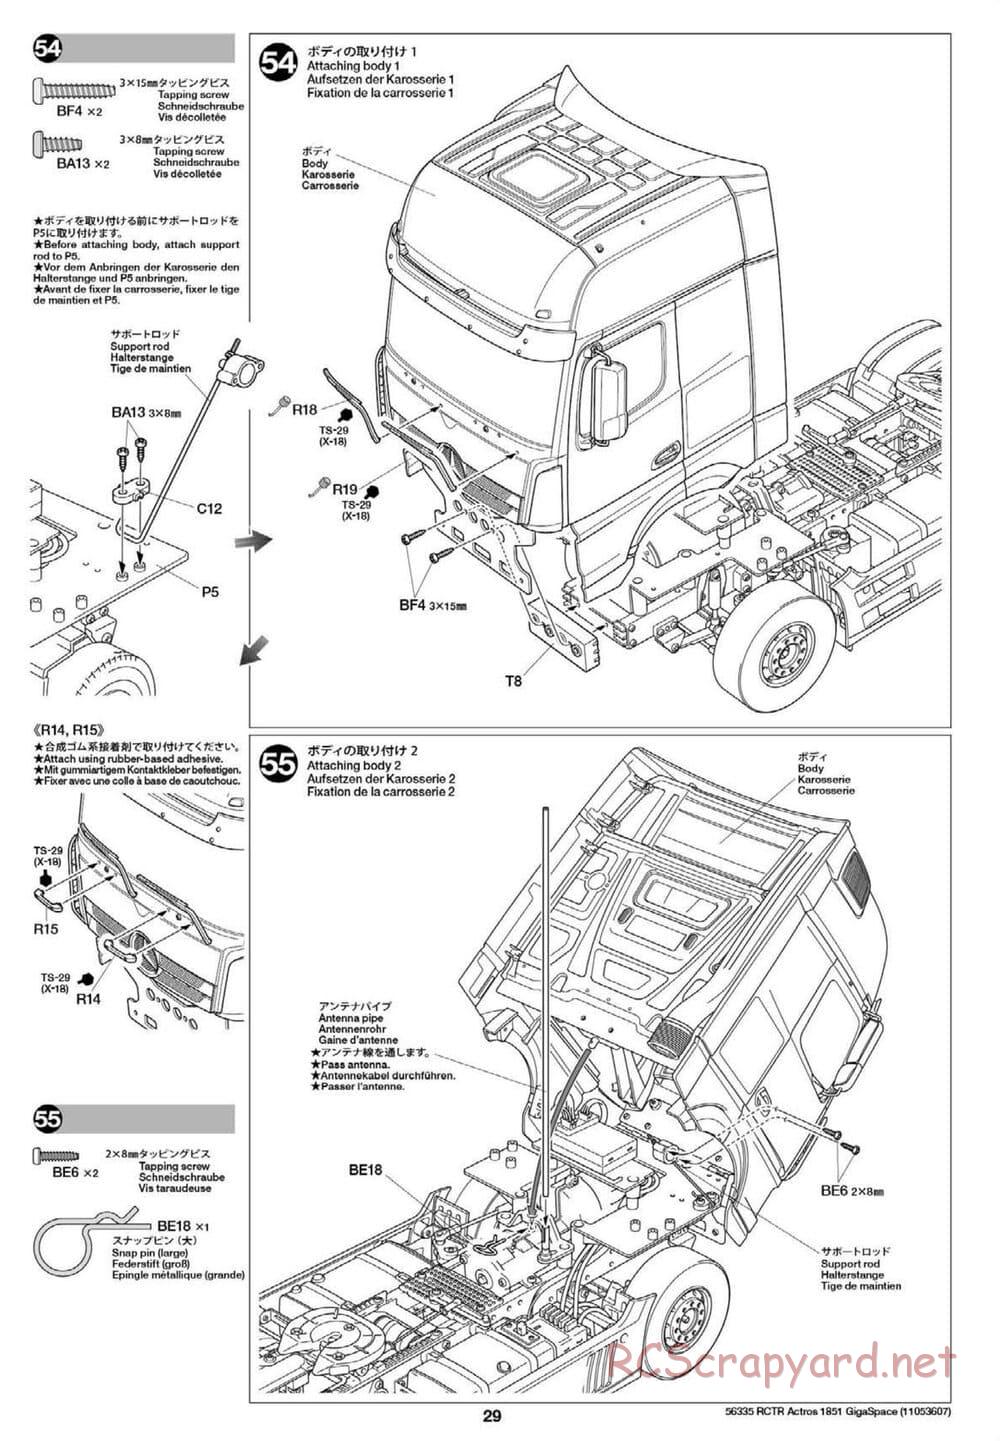 Tamiya - Mercedes-Benz Actros 1851 Gigaspace Tractor Truck Chassis - Manual - Page 29